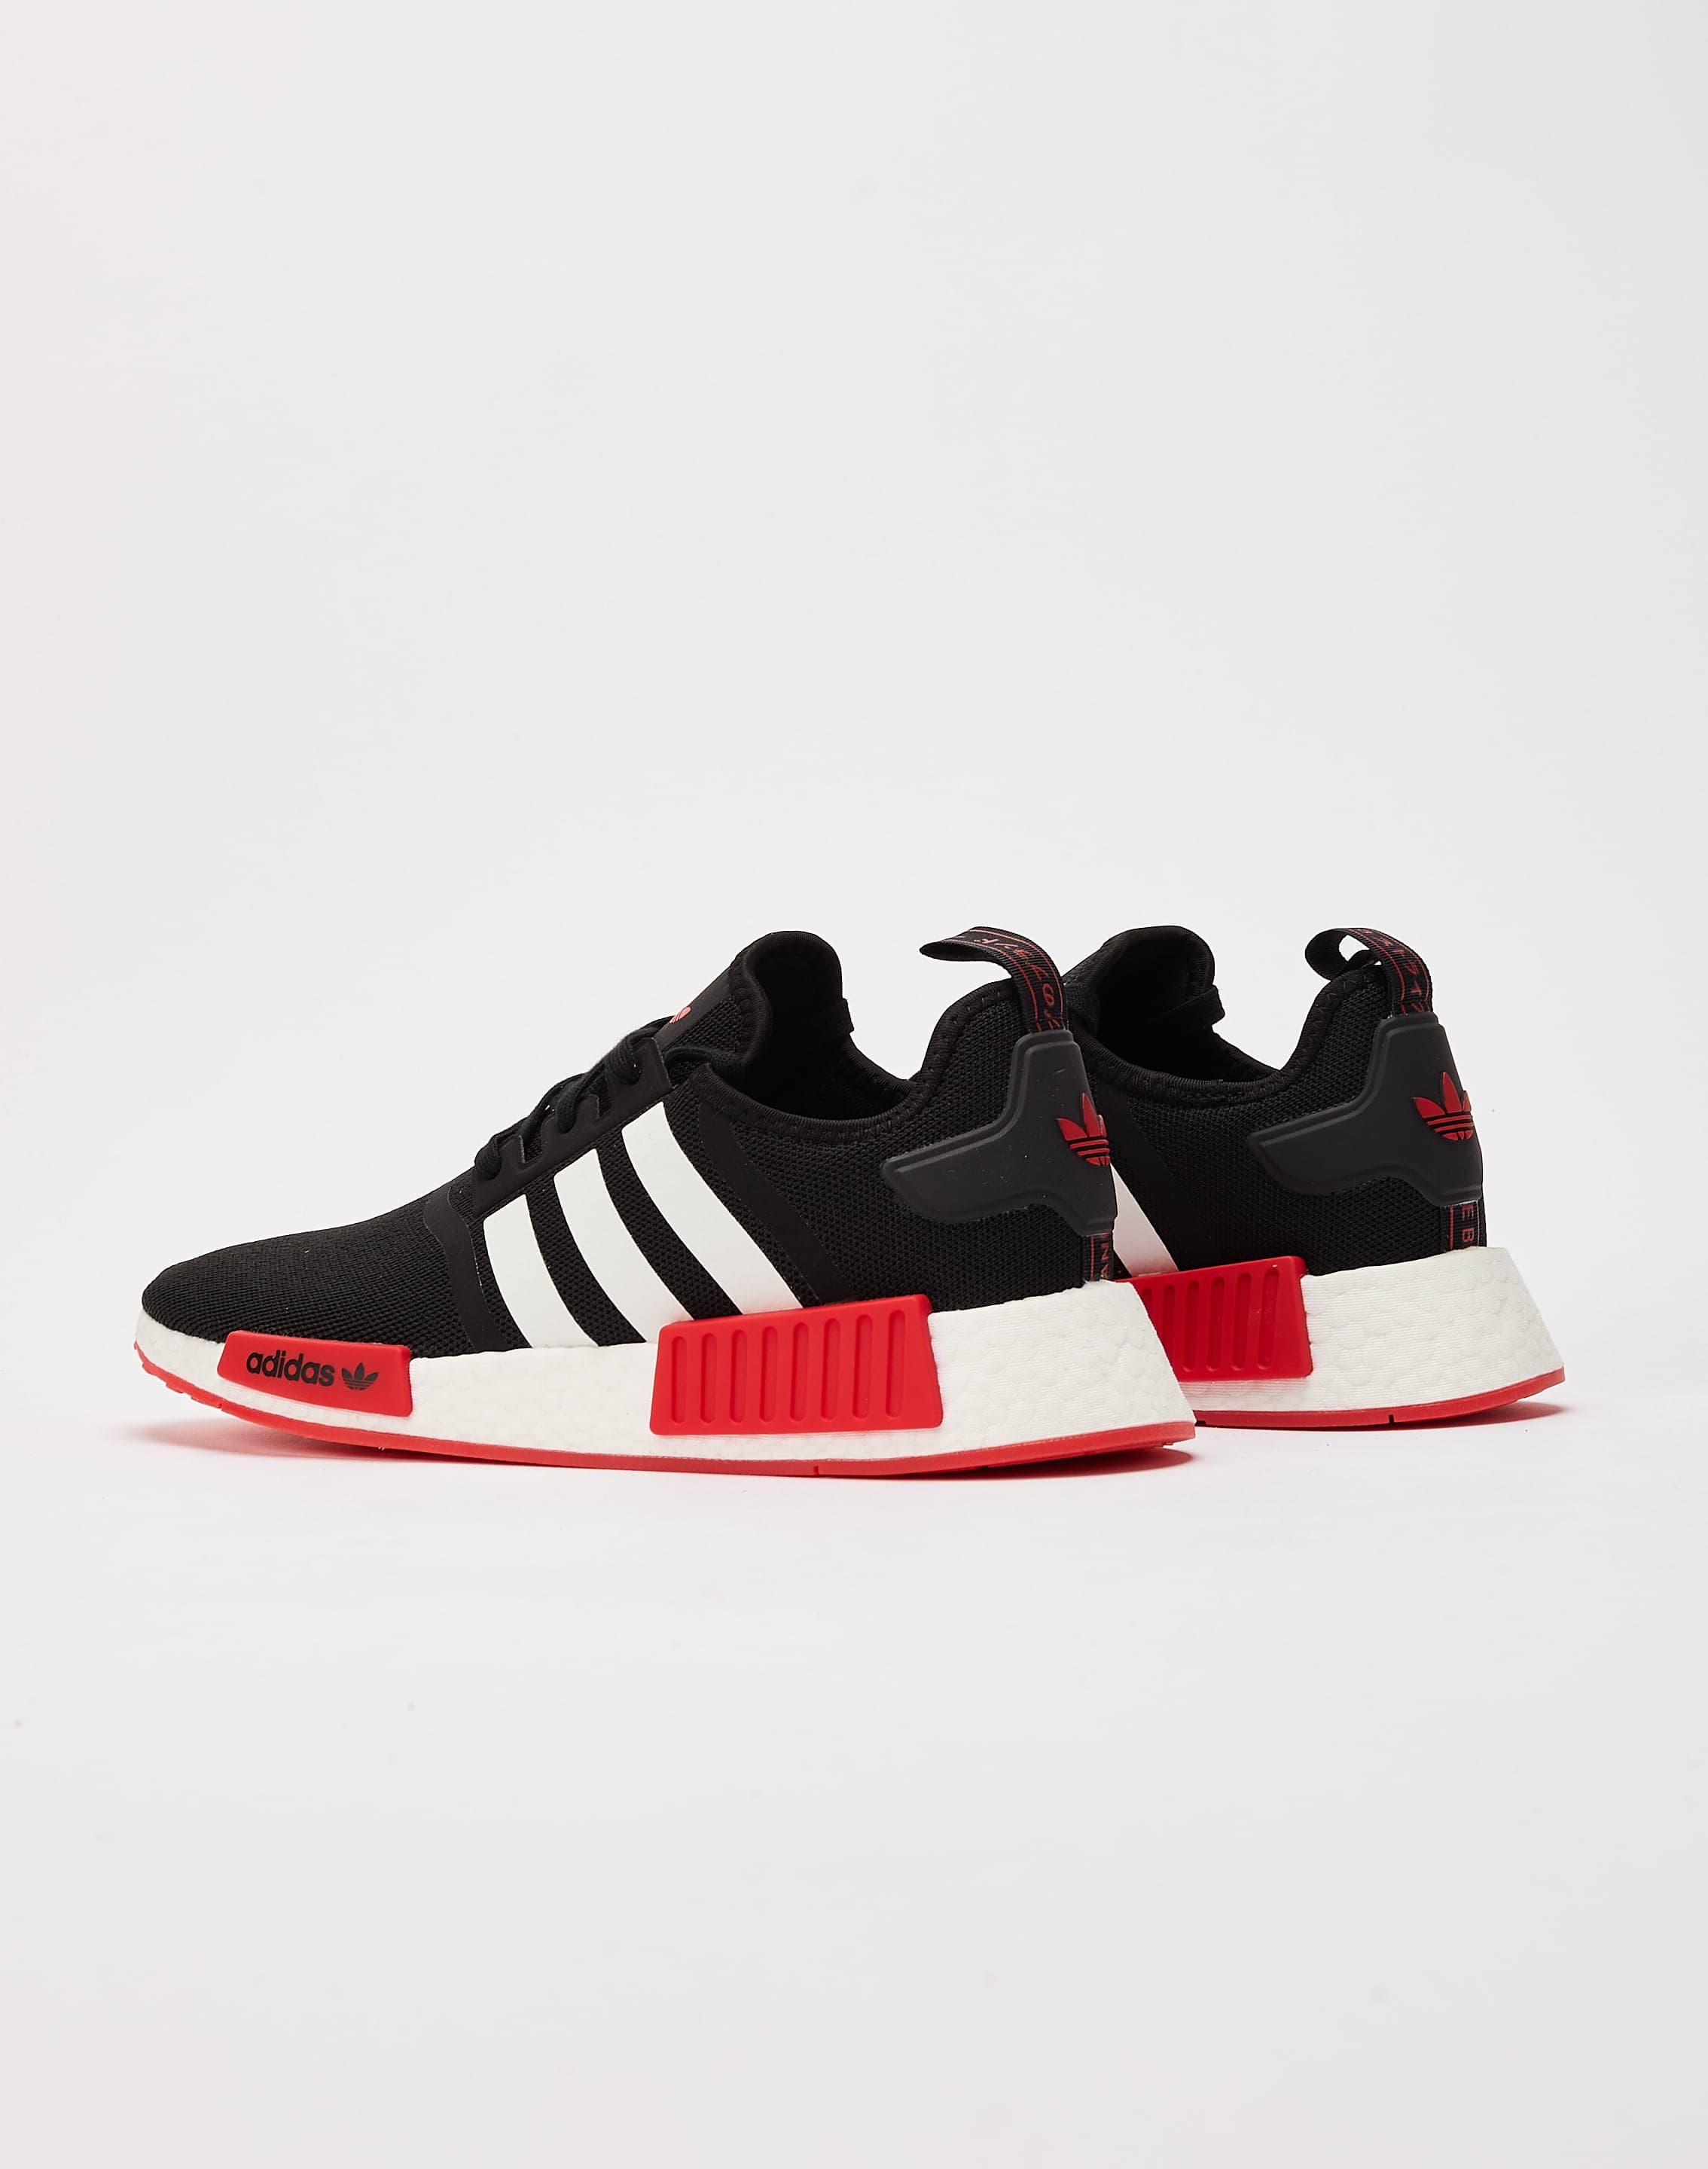 Adidas NMD R1 DTLR